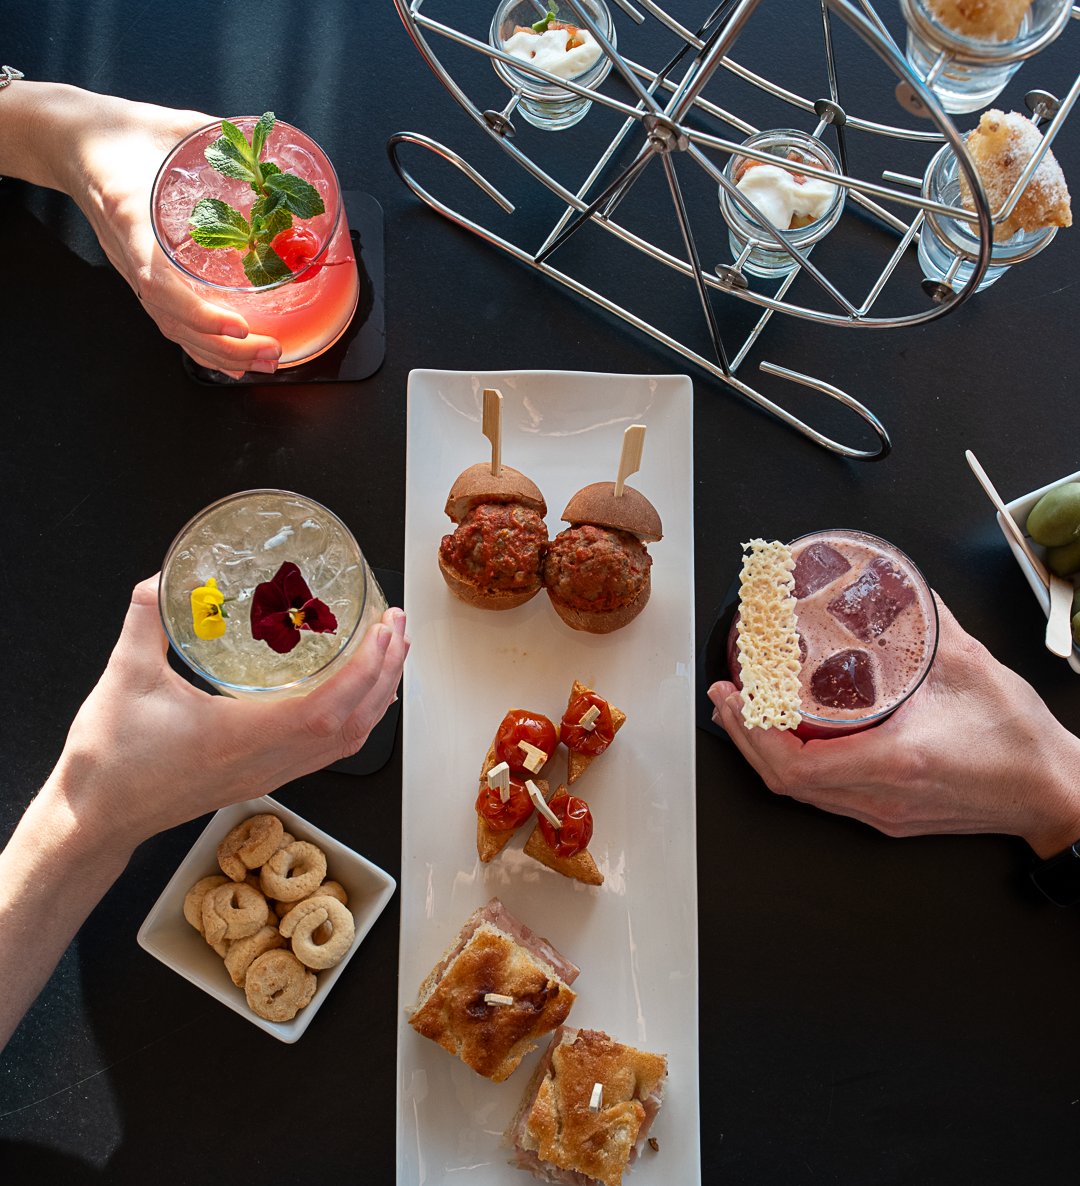 Dry snacks, finger food and chef's tastings served on an original Ferris wheel,
finger food and dry snacks accompanied always the cocktails of our aperitif. 🍹🎡

#47boutiquehotel #rome